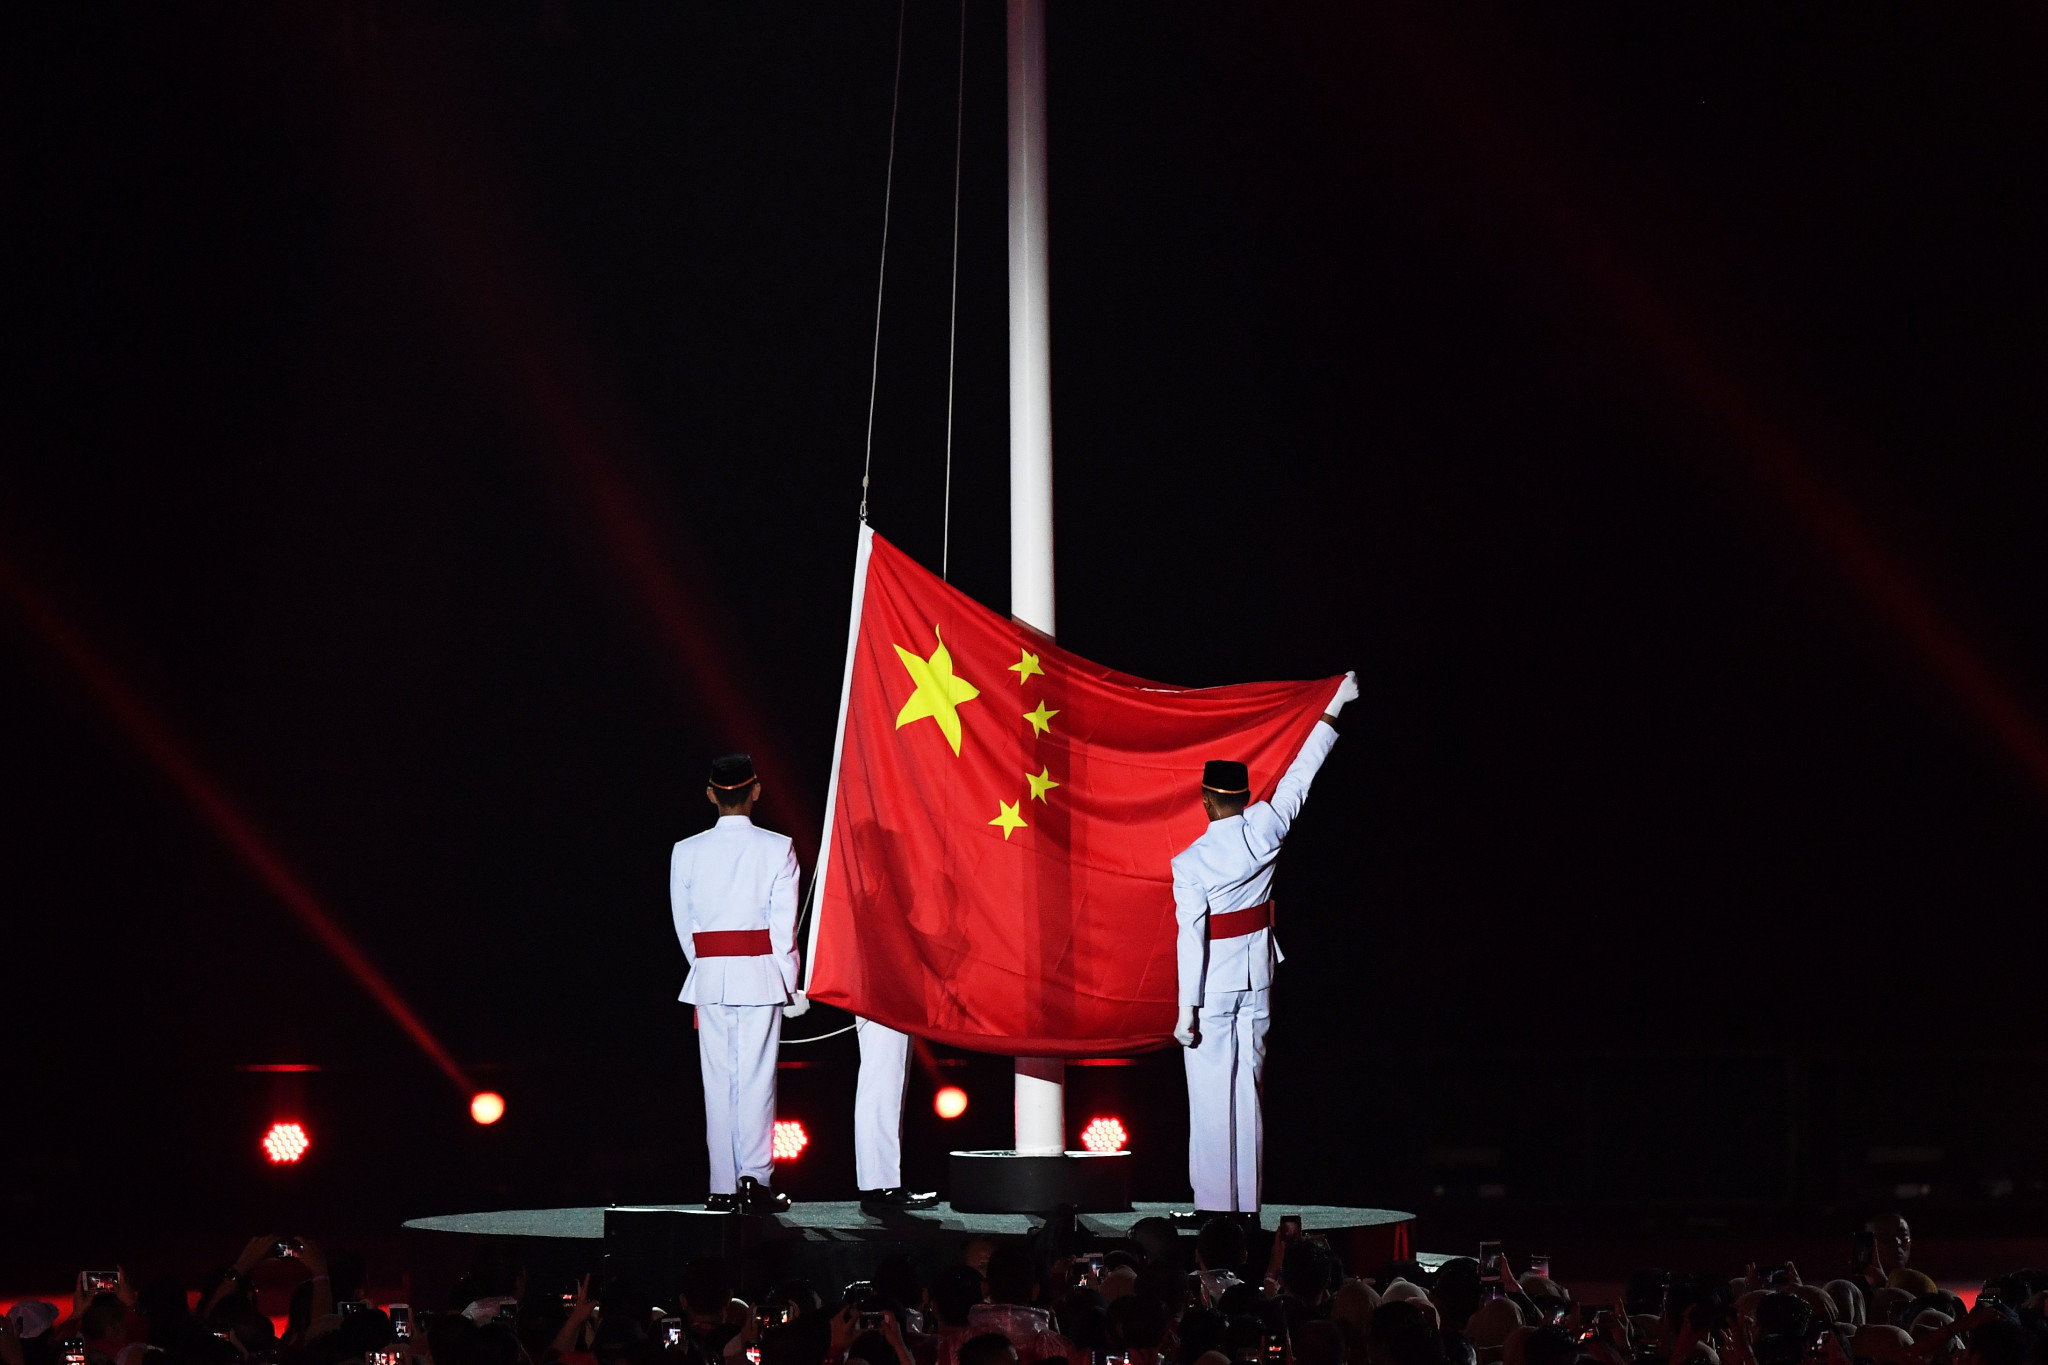 The Chinese national flag was hoisted as part of proceedings ©Getty Images